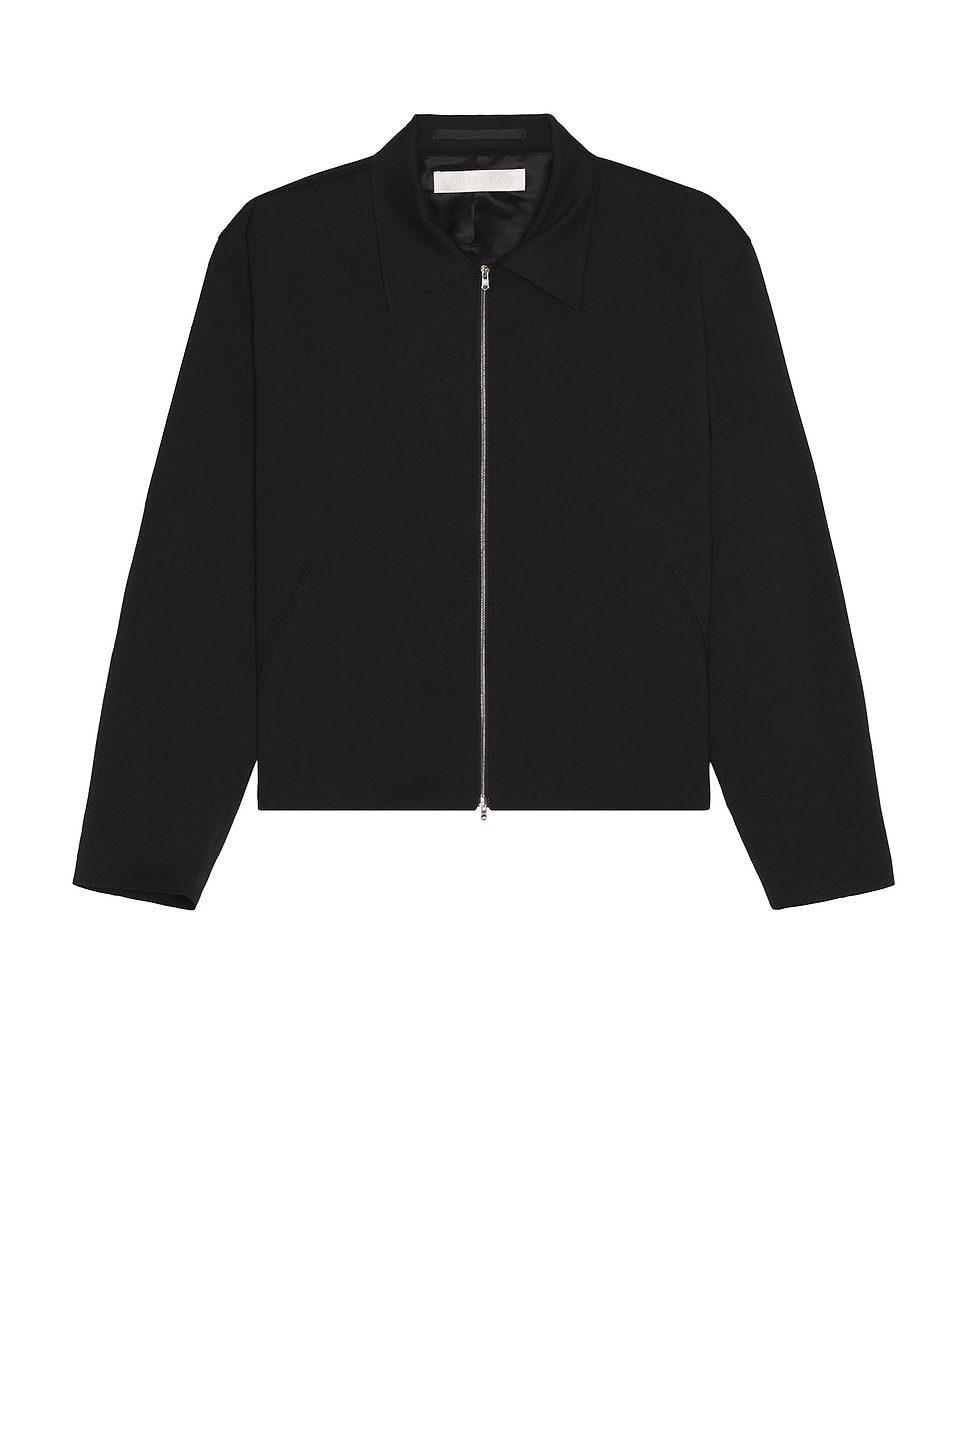 Image 1 of Our Legacy Mini Jacket in Black Worsted Wool